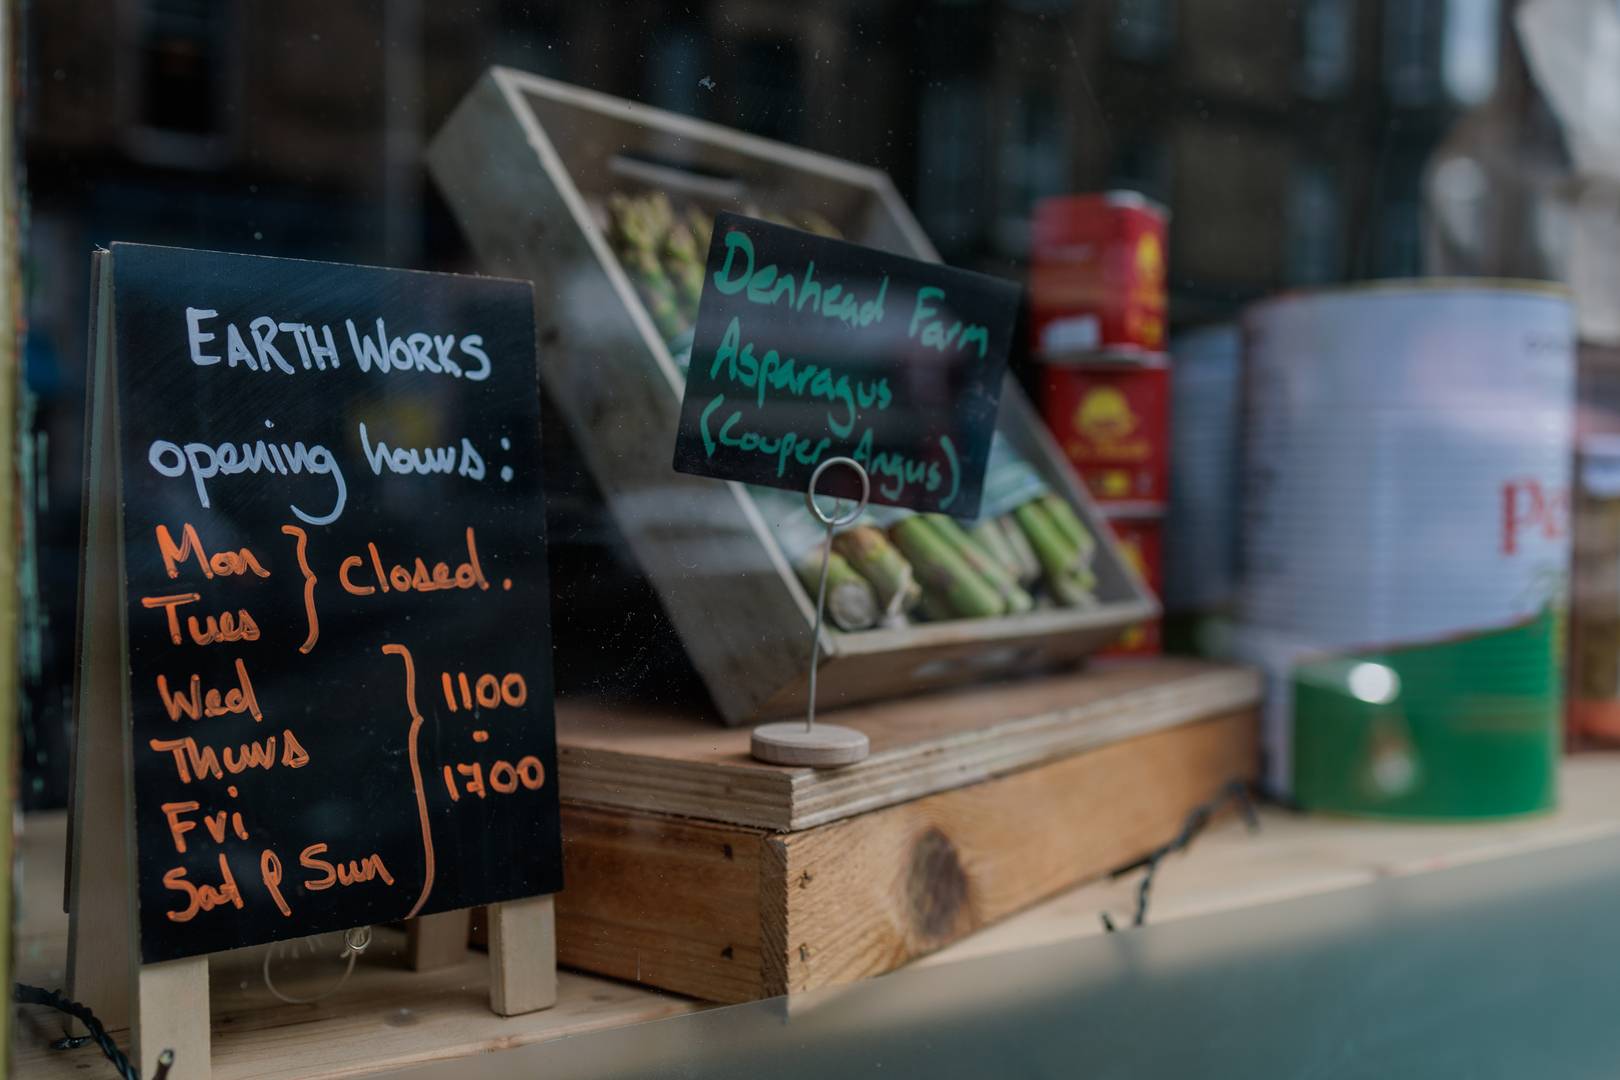 Earth Works opening hours and box of asparagus in shop window